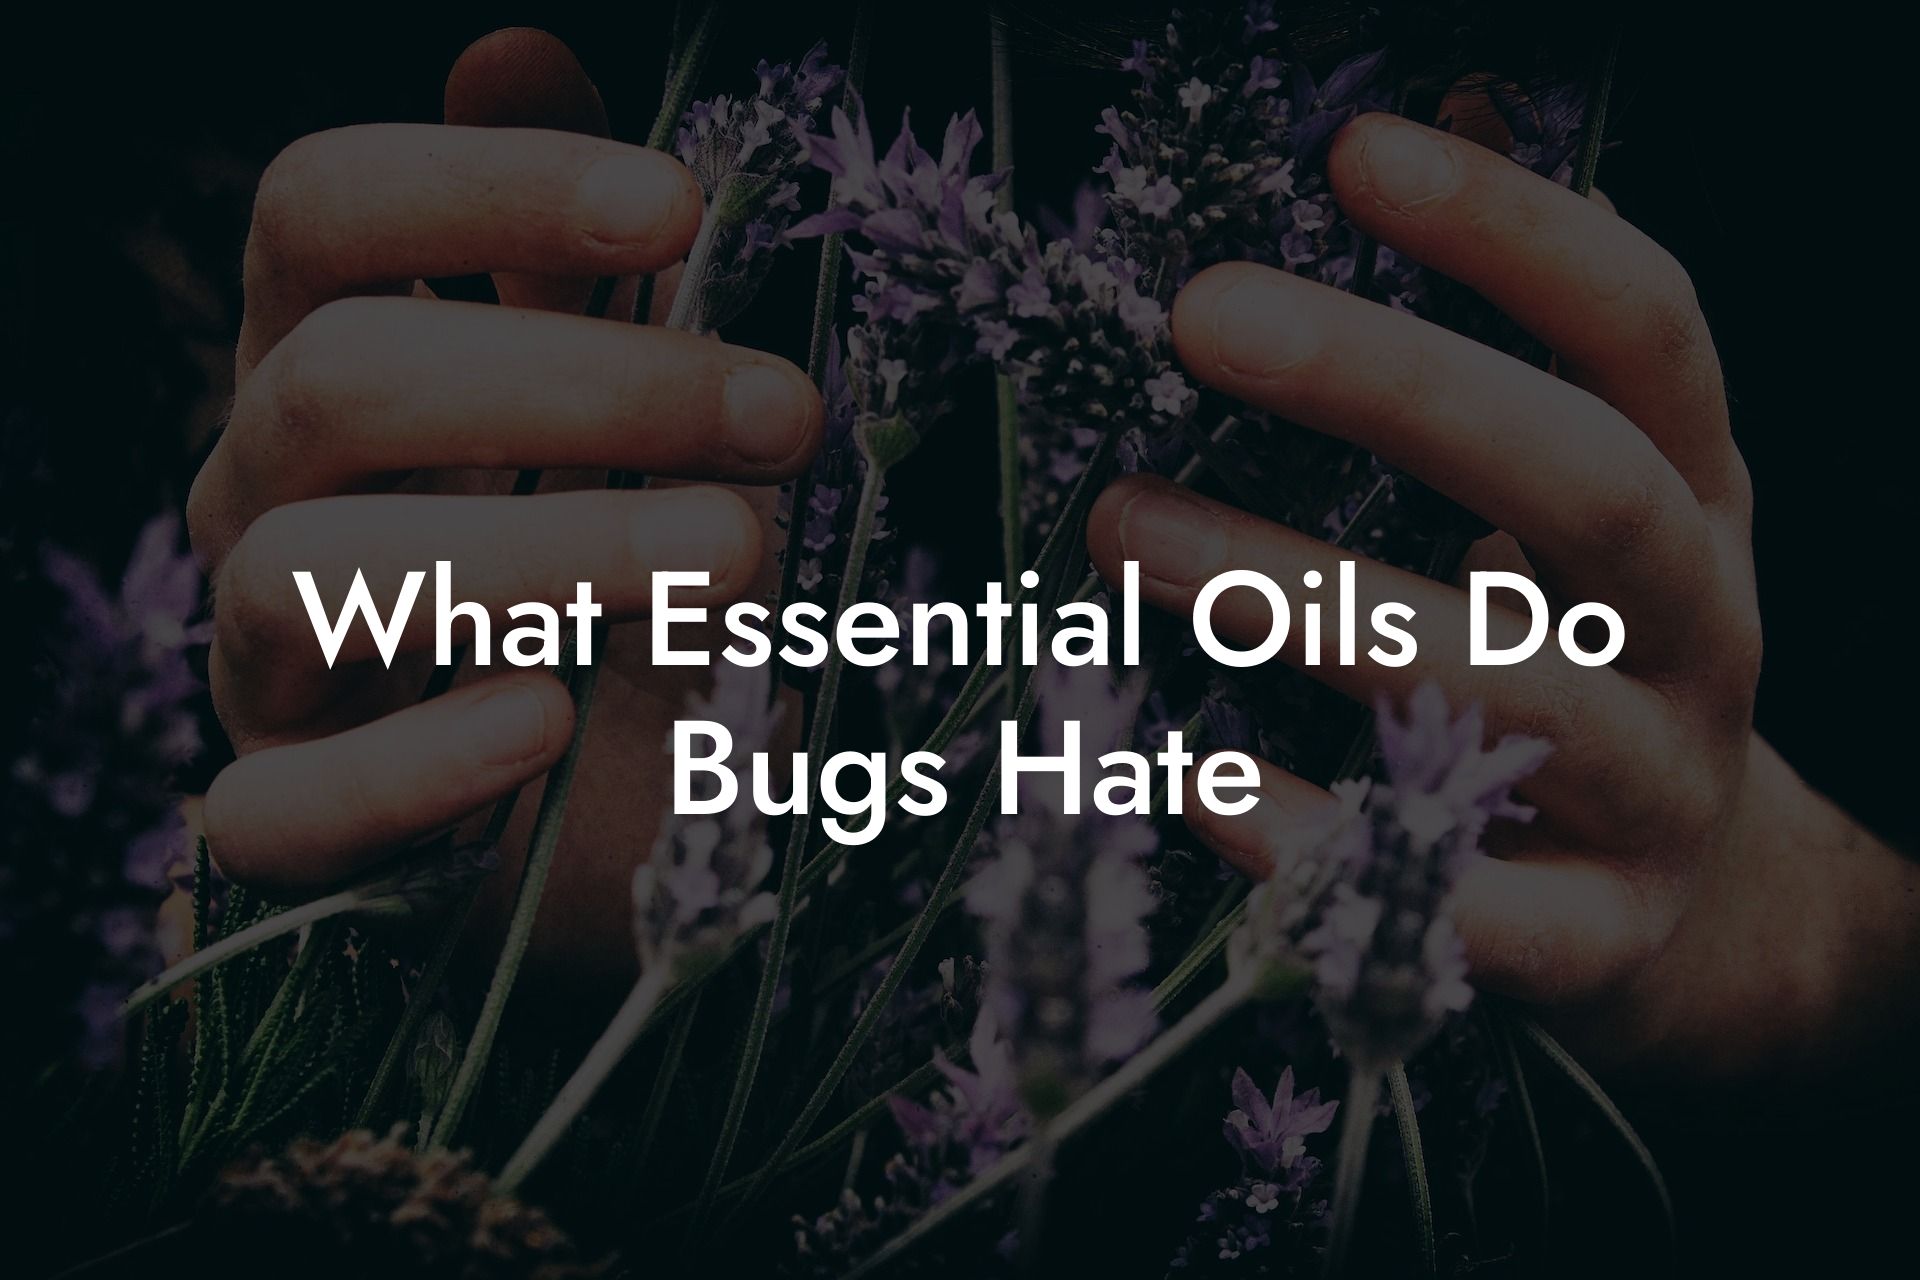 What Essential Oils Do Bugs Hate